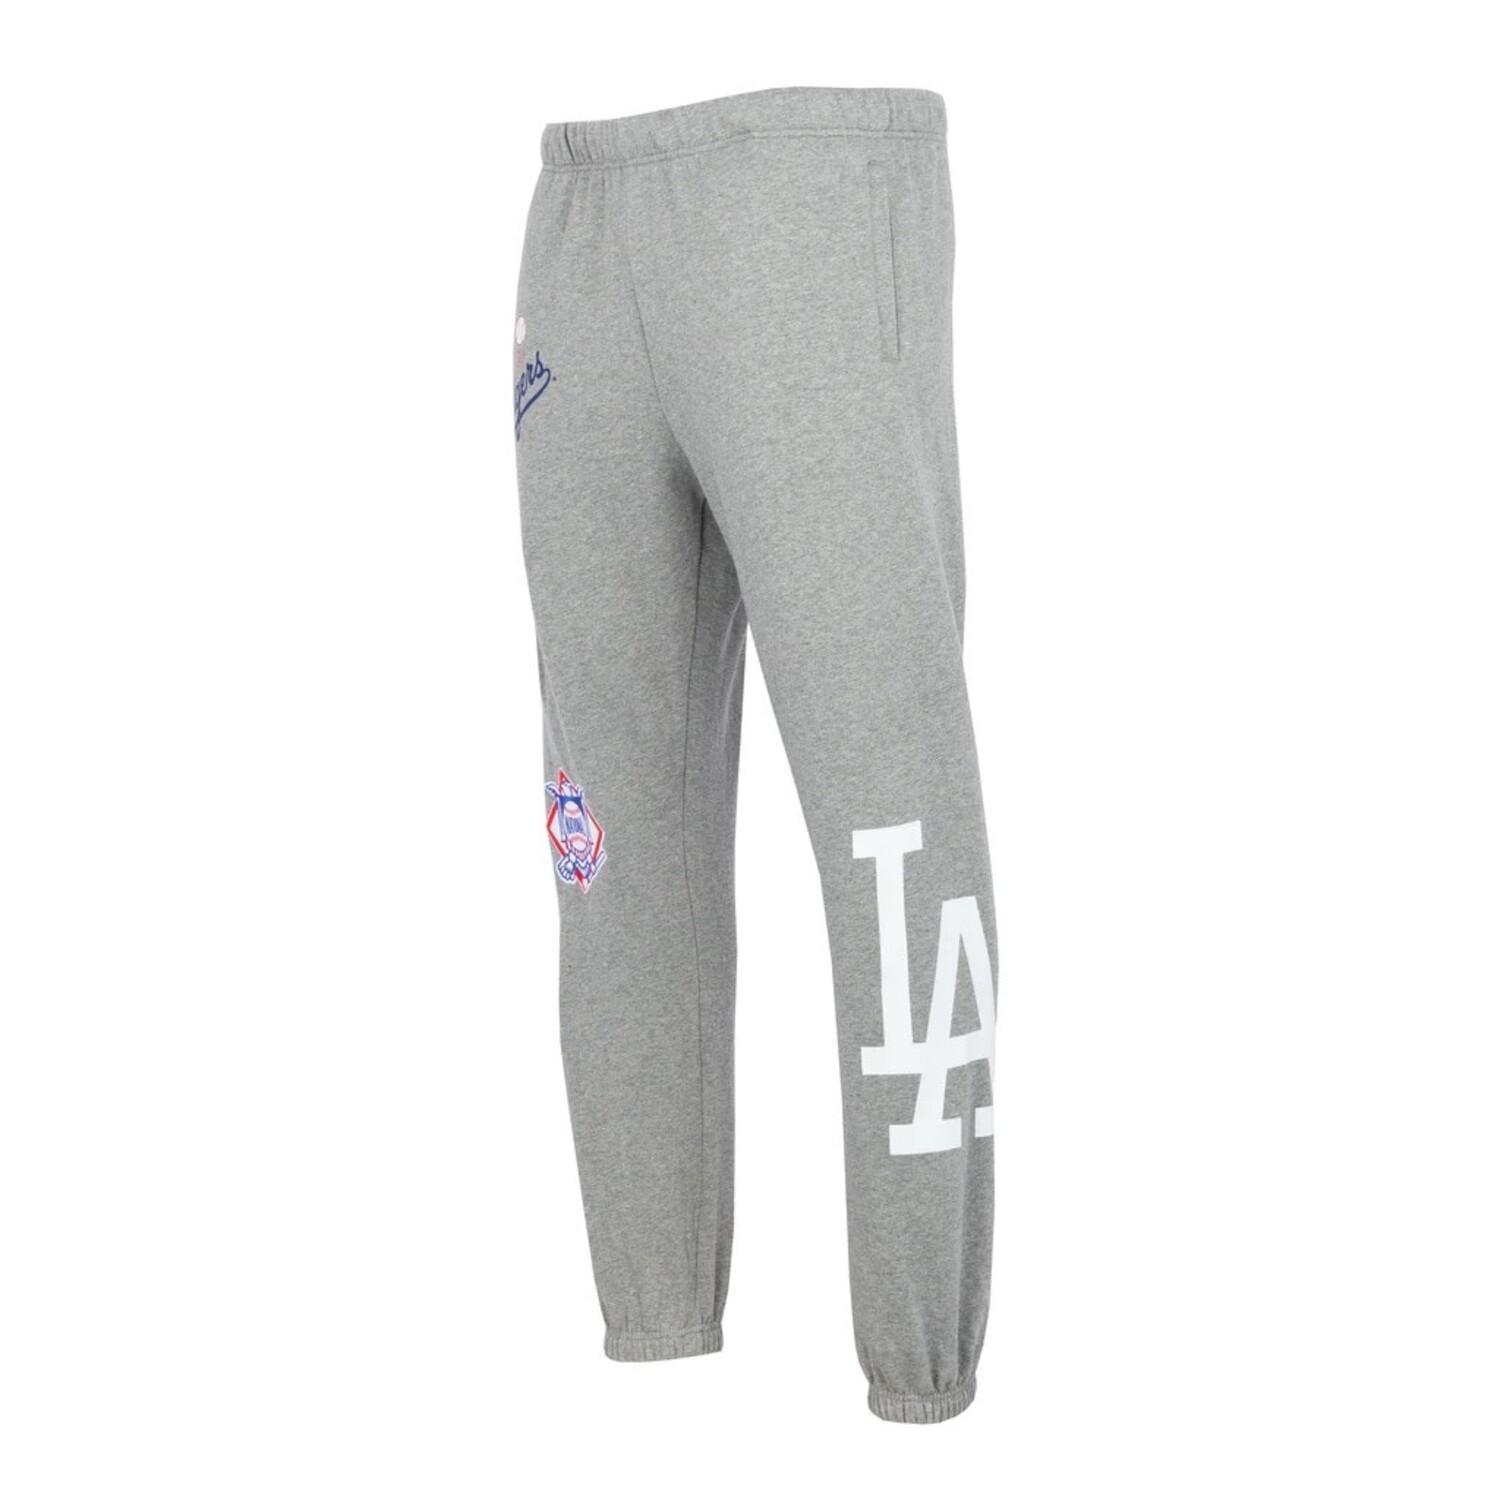 Mitchell & Ness Dodgers City Collection T-shirt / Grey